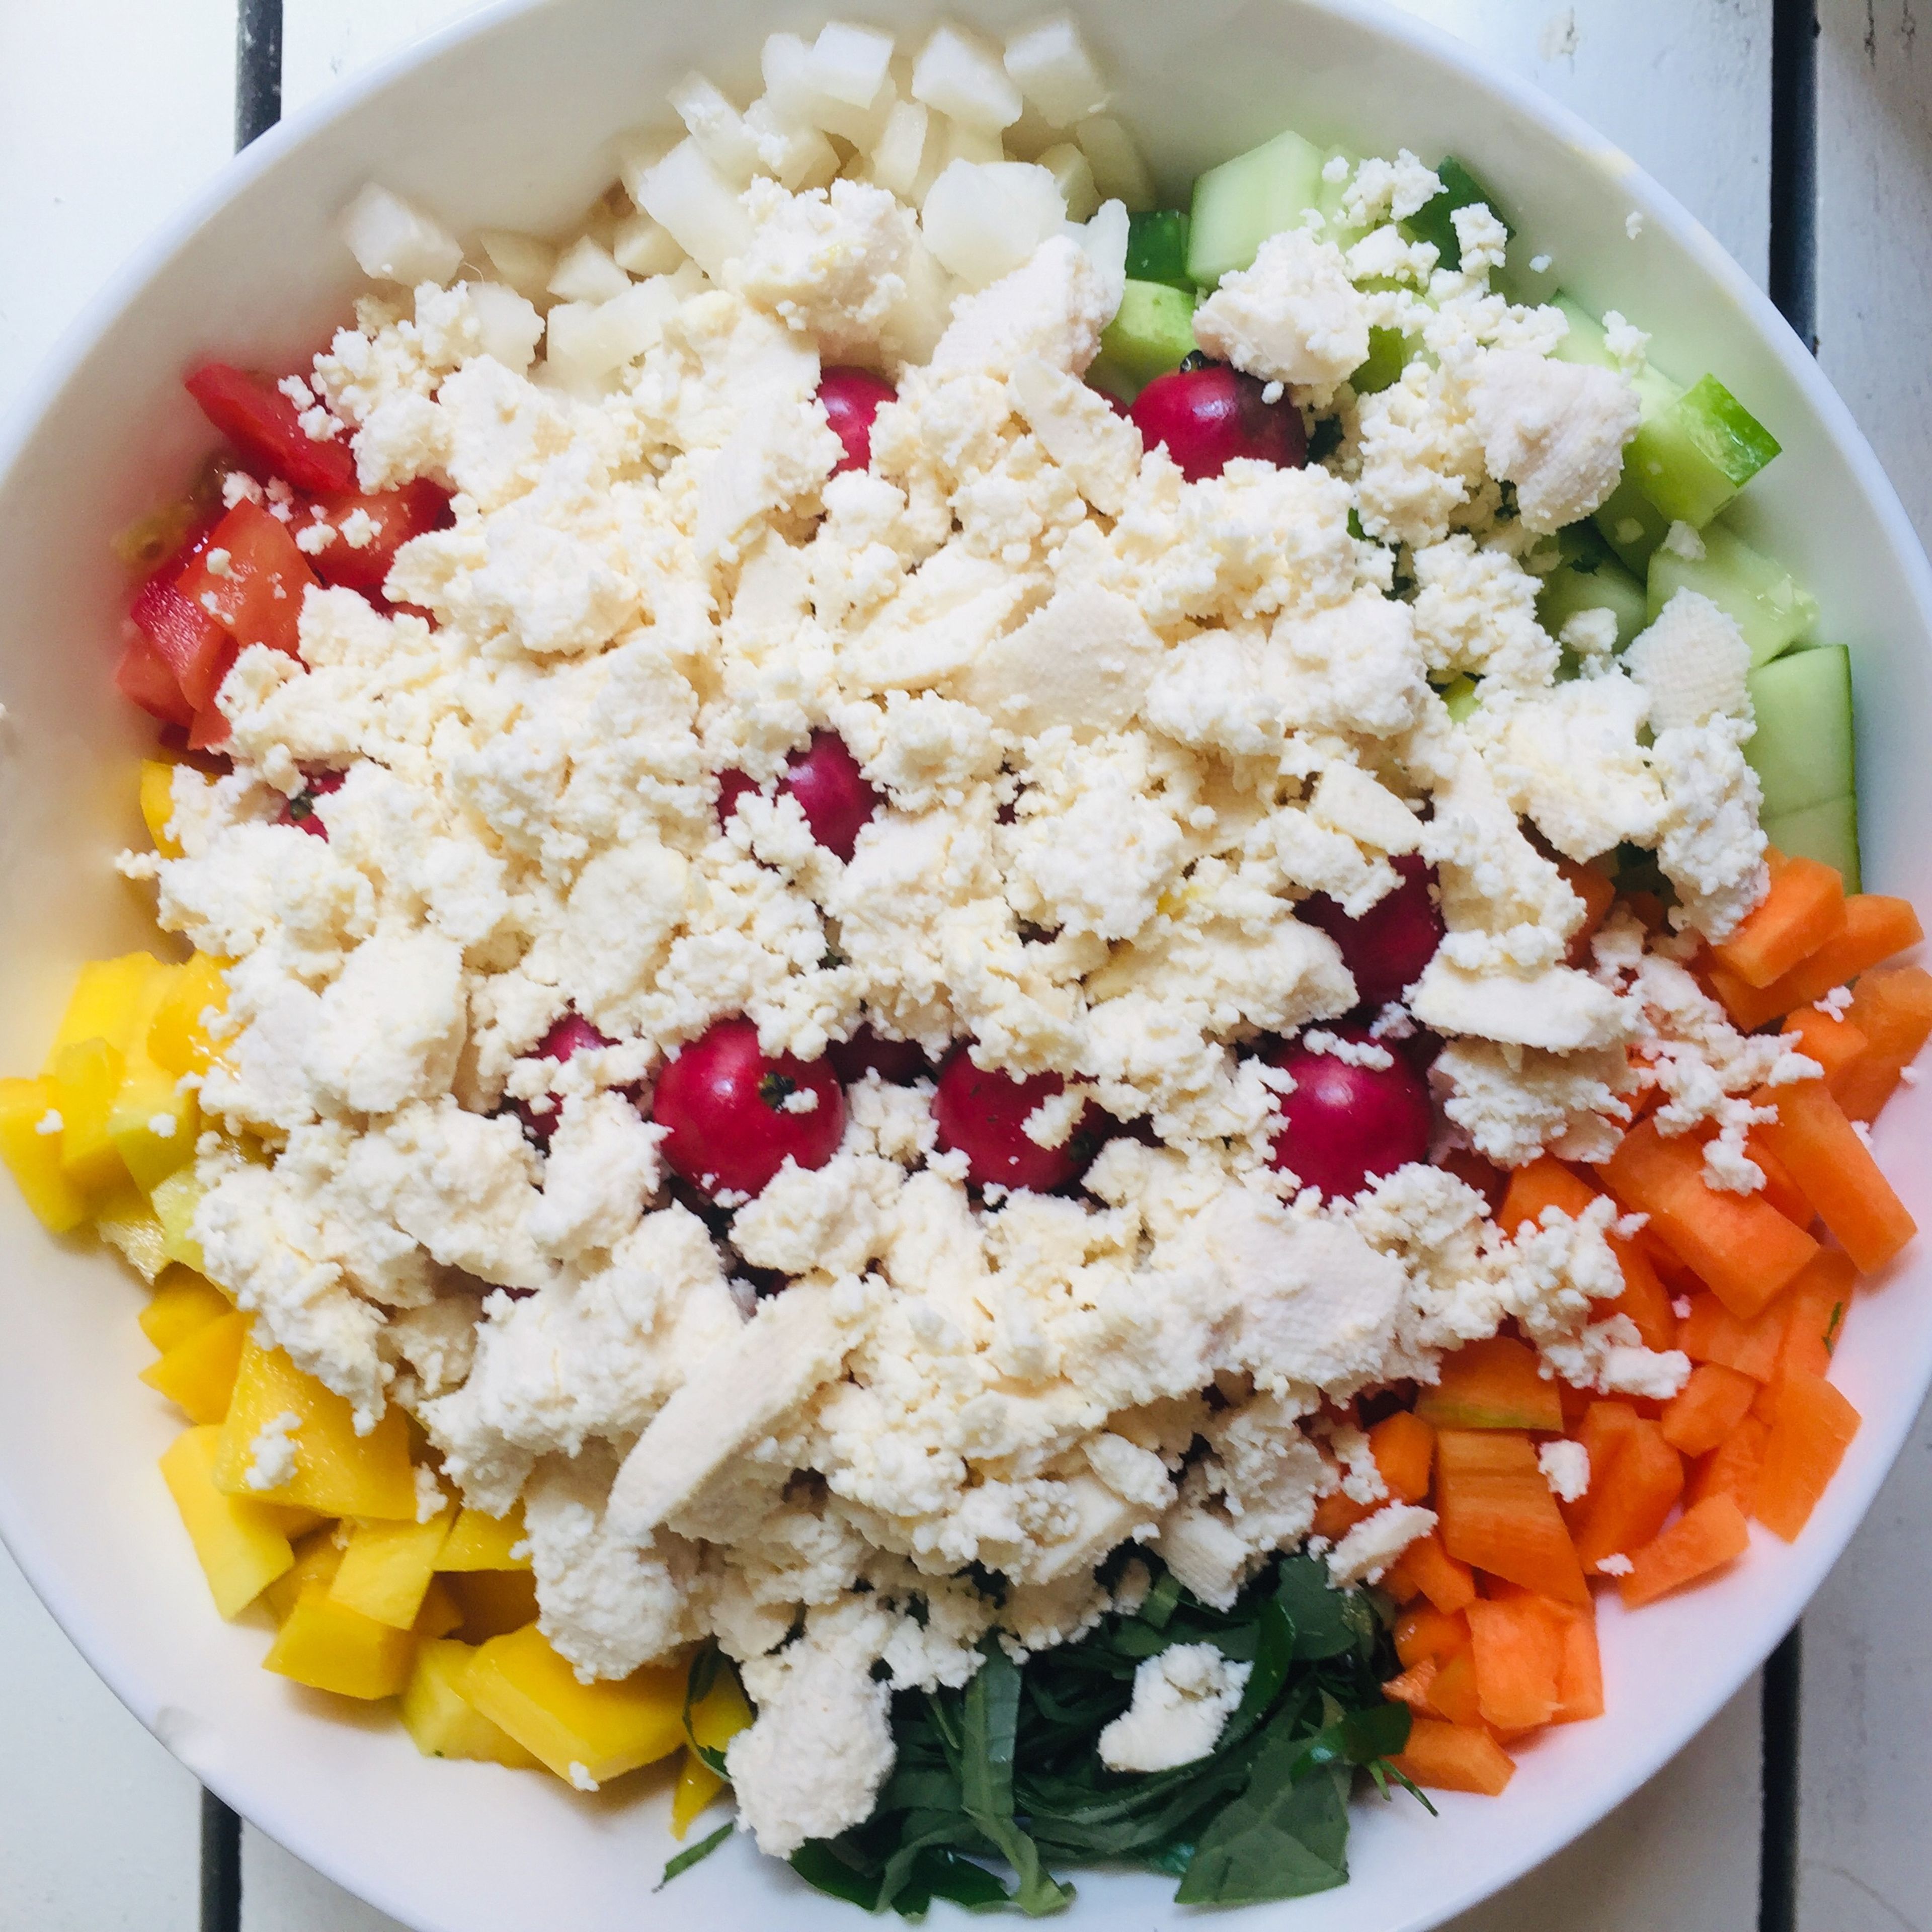 Chop the ricotta cheese into small pieces and add to the salad bowl.